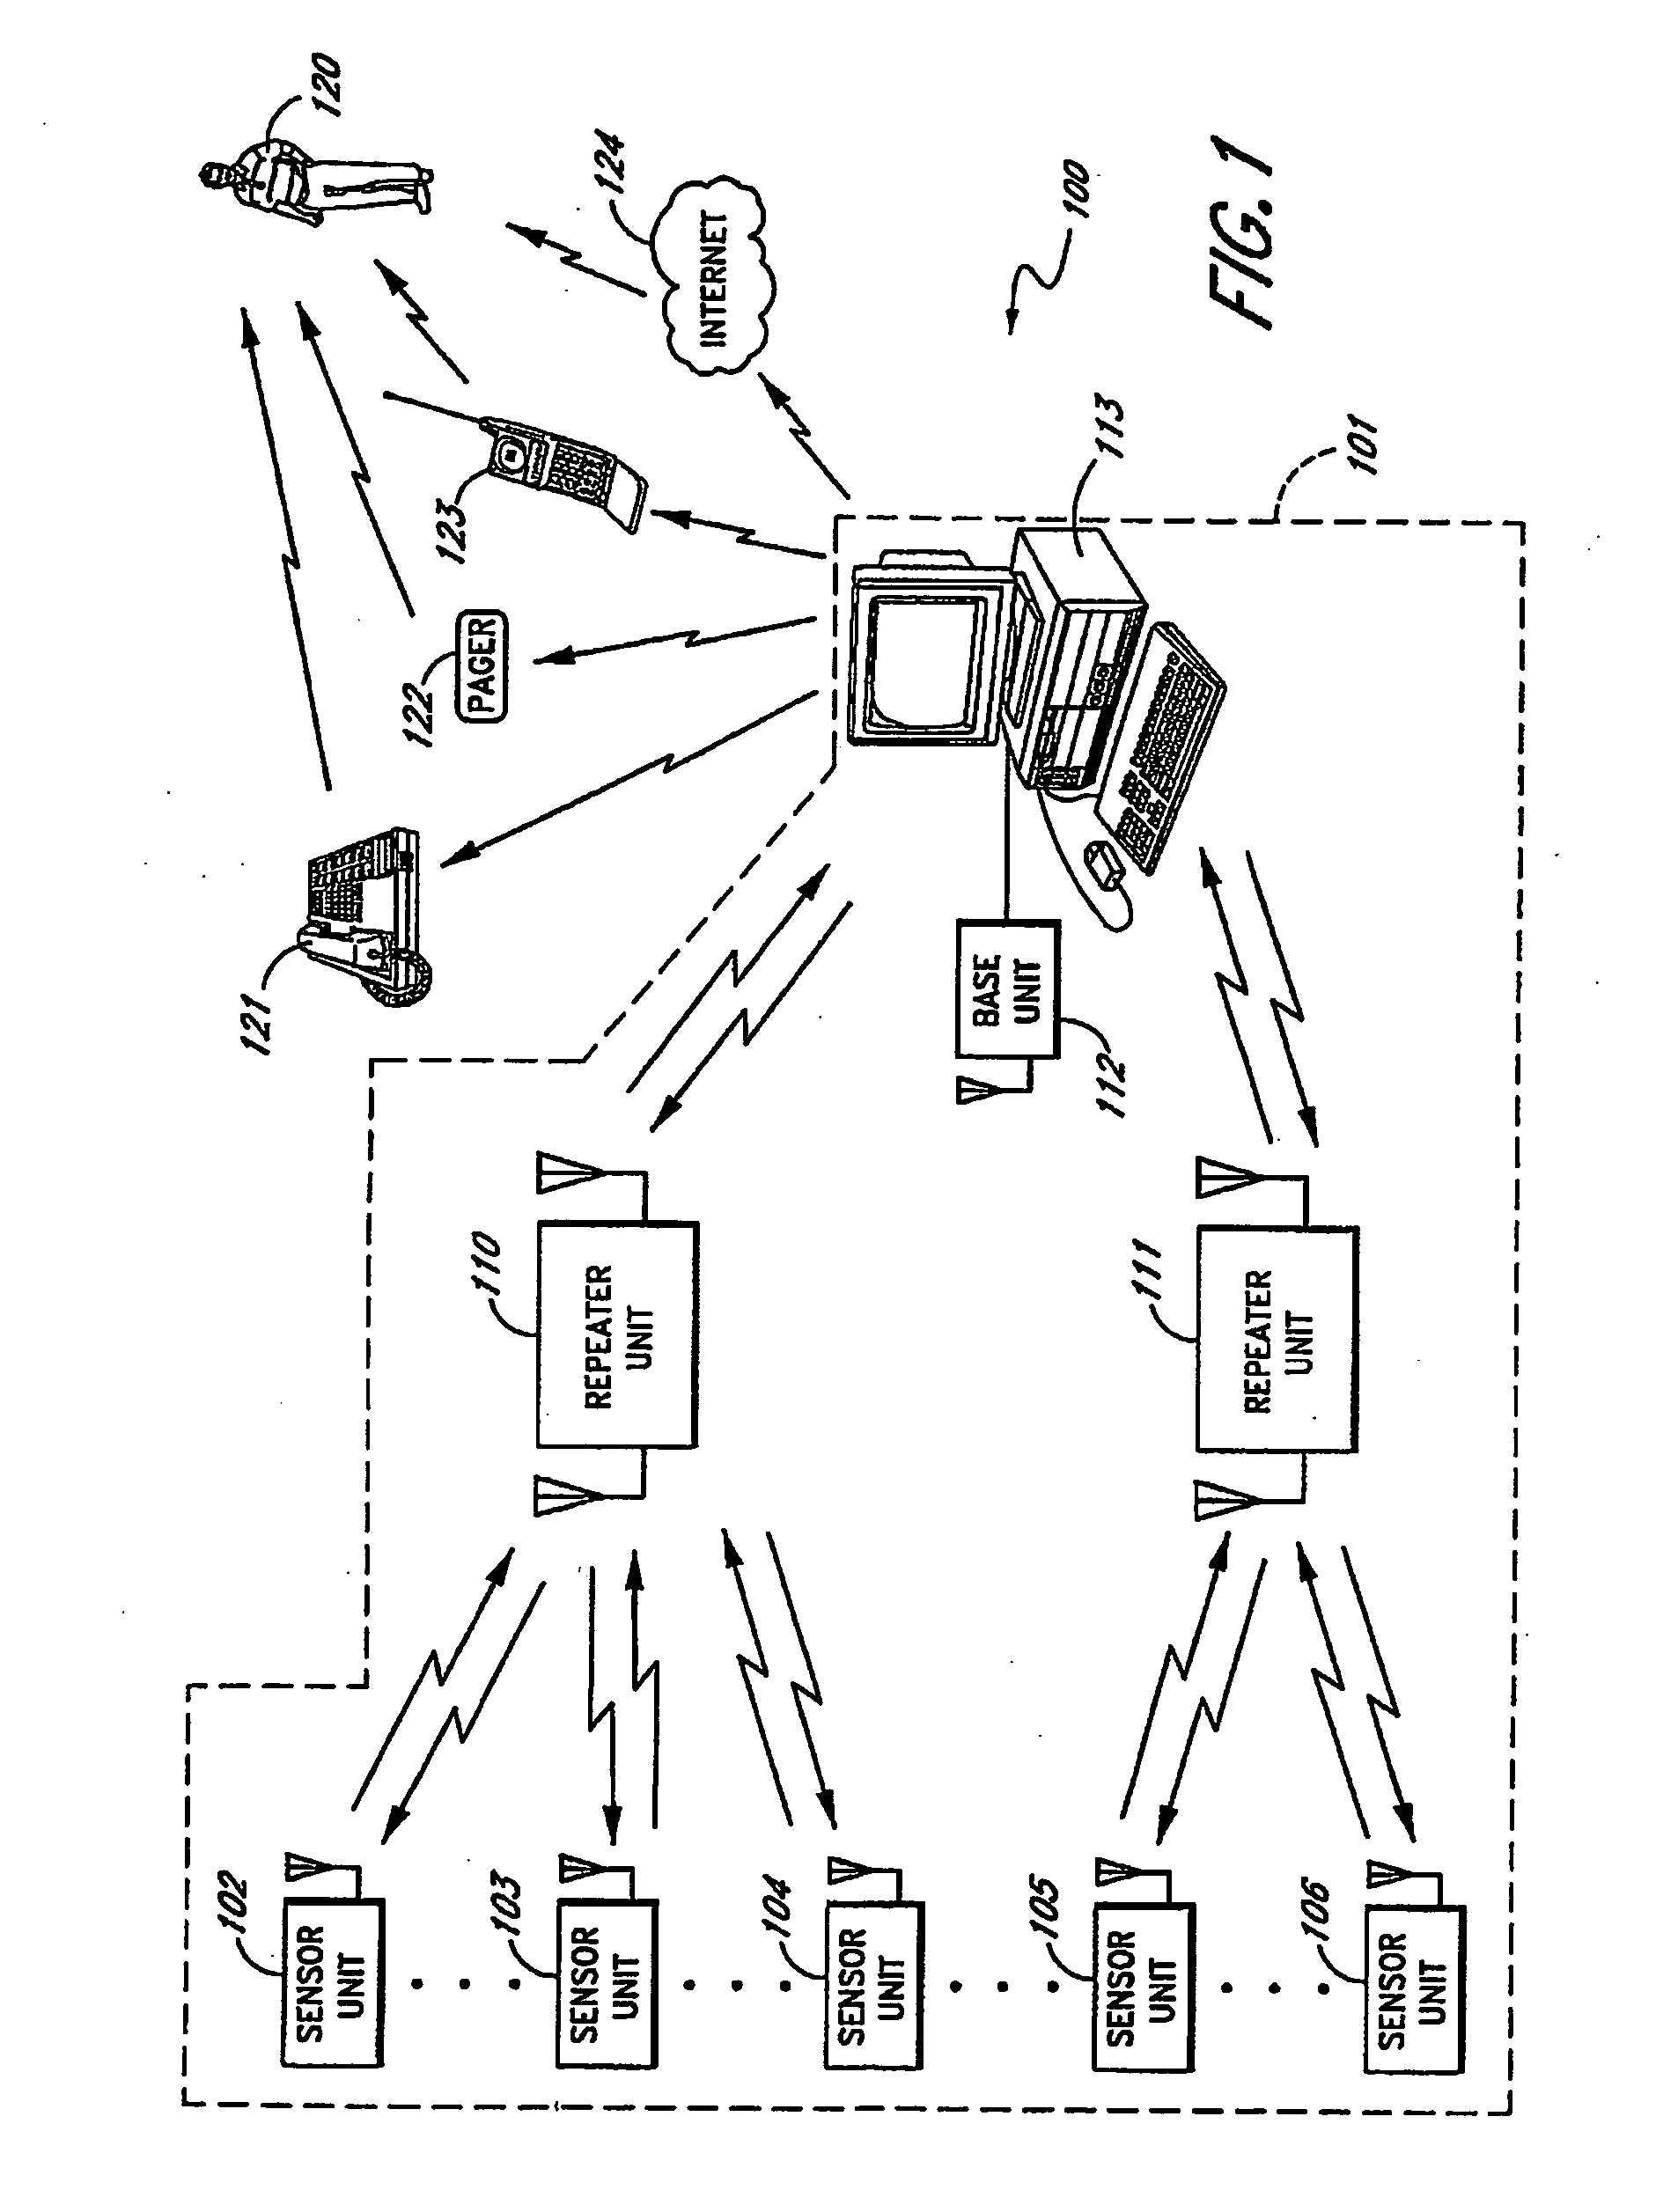 Method and apparatus for detecting water leaks